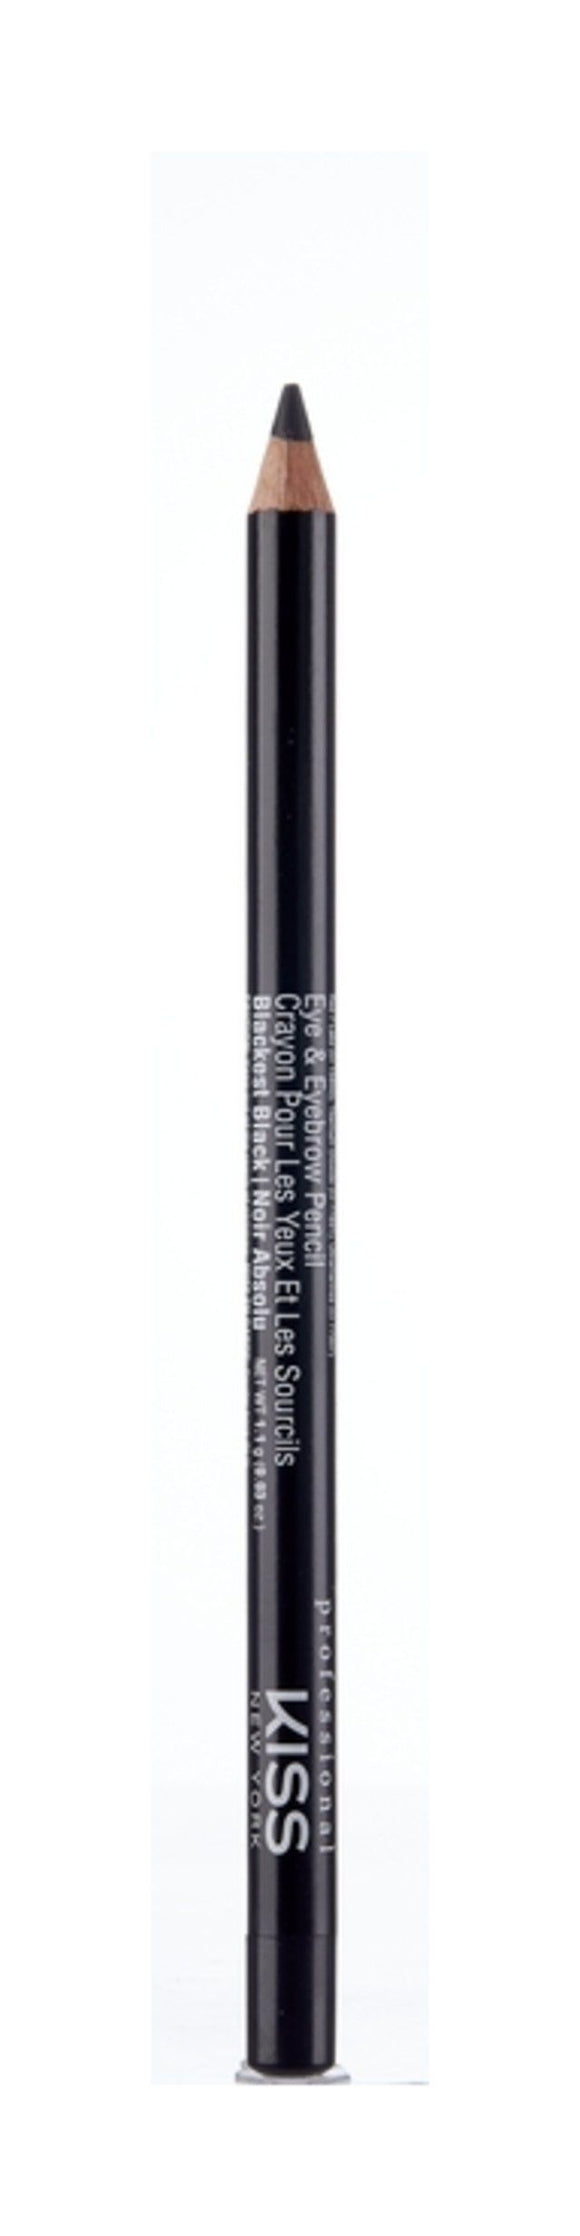 KSNY PRO EYE AND BROW WOODEN PENCIL LINER